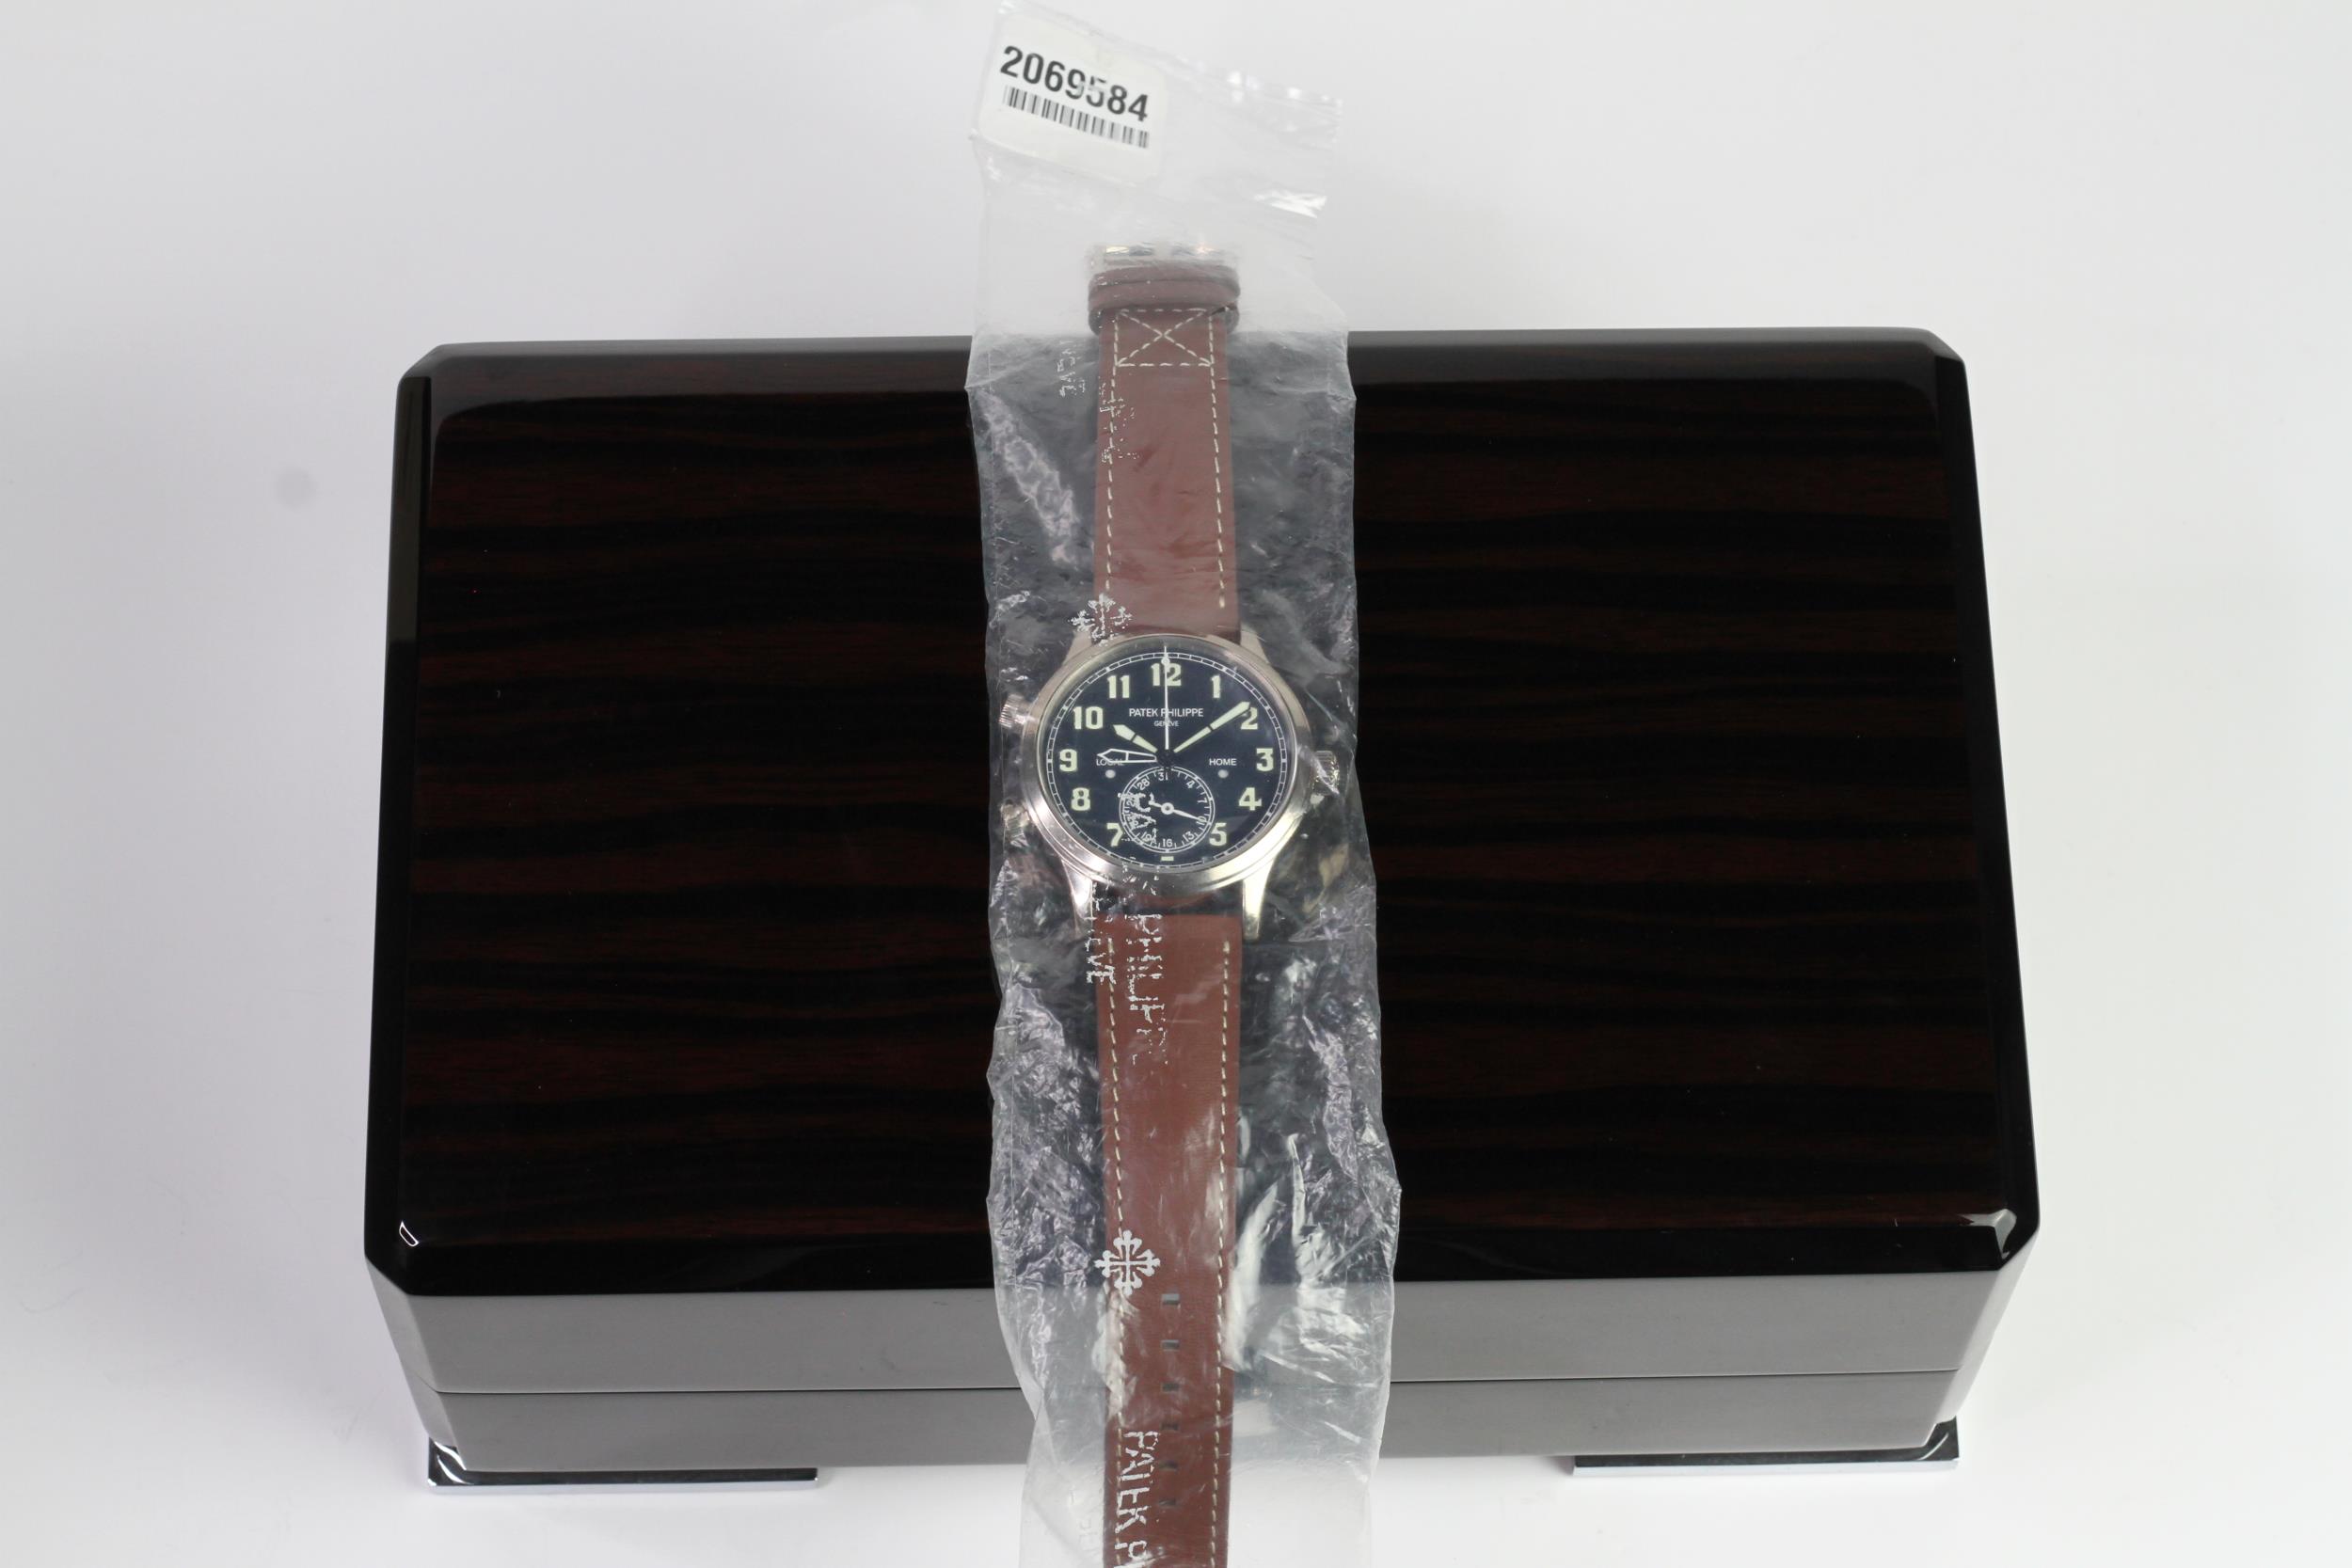 A FINE PATEK PHILIPPE CALATRAVA PILOT TRAVEL TIME REFERENCE 5224G-001, SEALED FROM SERVICE, WITH BOX - Image 5 of 19